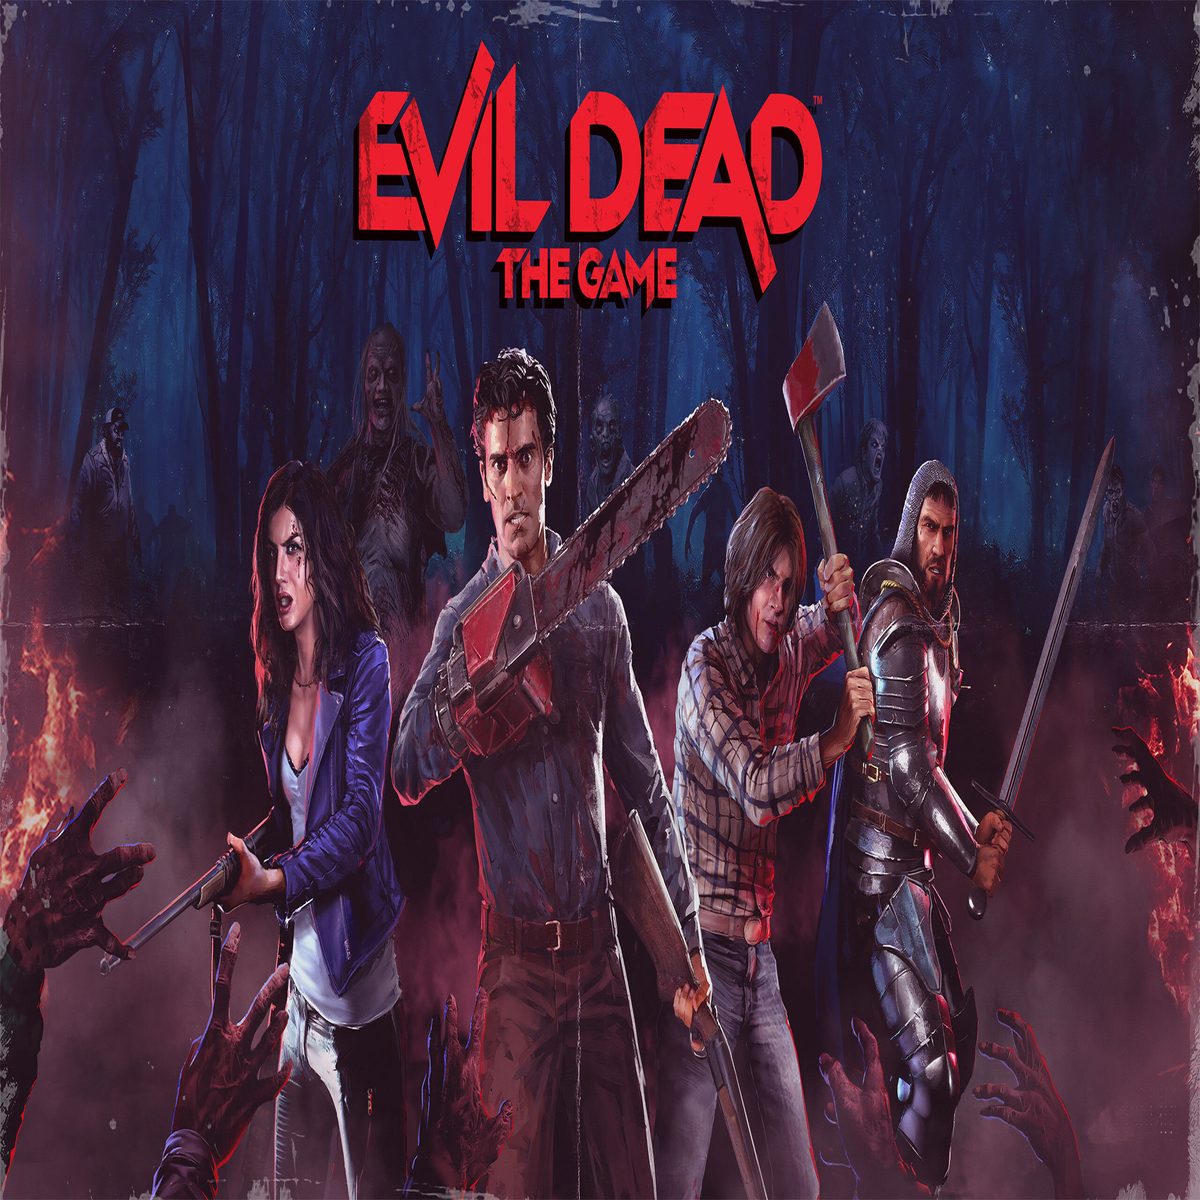 Review  Evil Dead: The Game - XboxEra